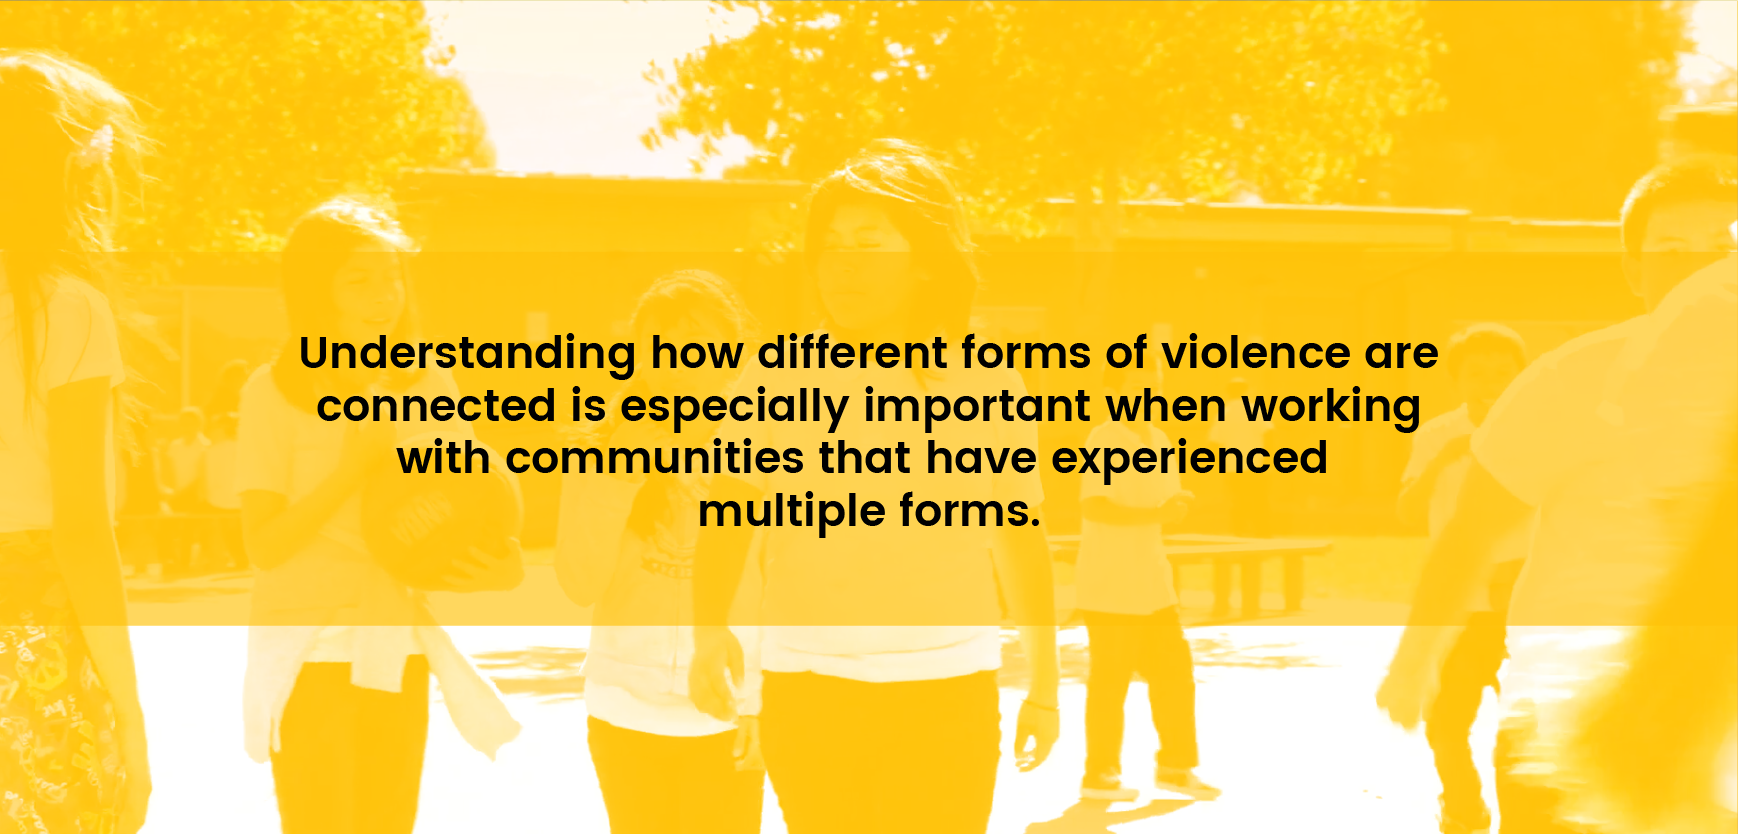 Understanding how different forms of violence are connected is especially important when working with communities and people at high risk for experiencing multiple forms of violence (e.g. youth)